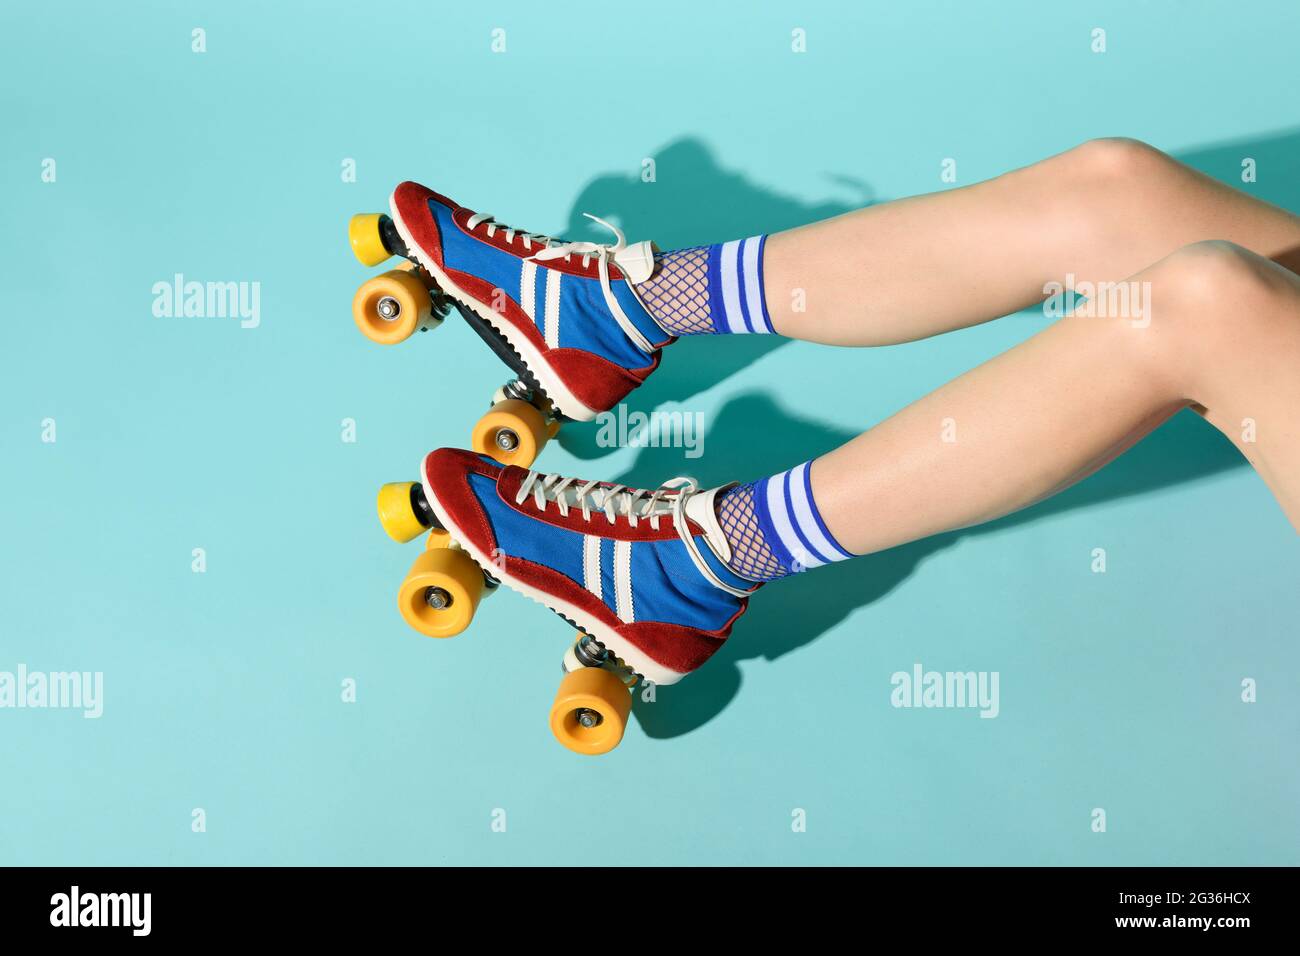 Young woman with thin skinny legs wearing colorful roller skates with yellow wheels and a view of her legs extending from the right over a blue backgr Stock Photo